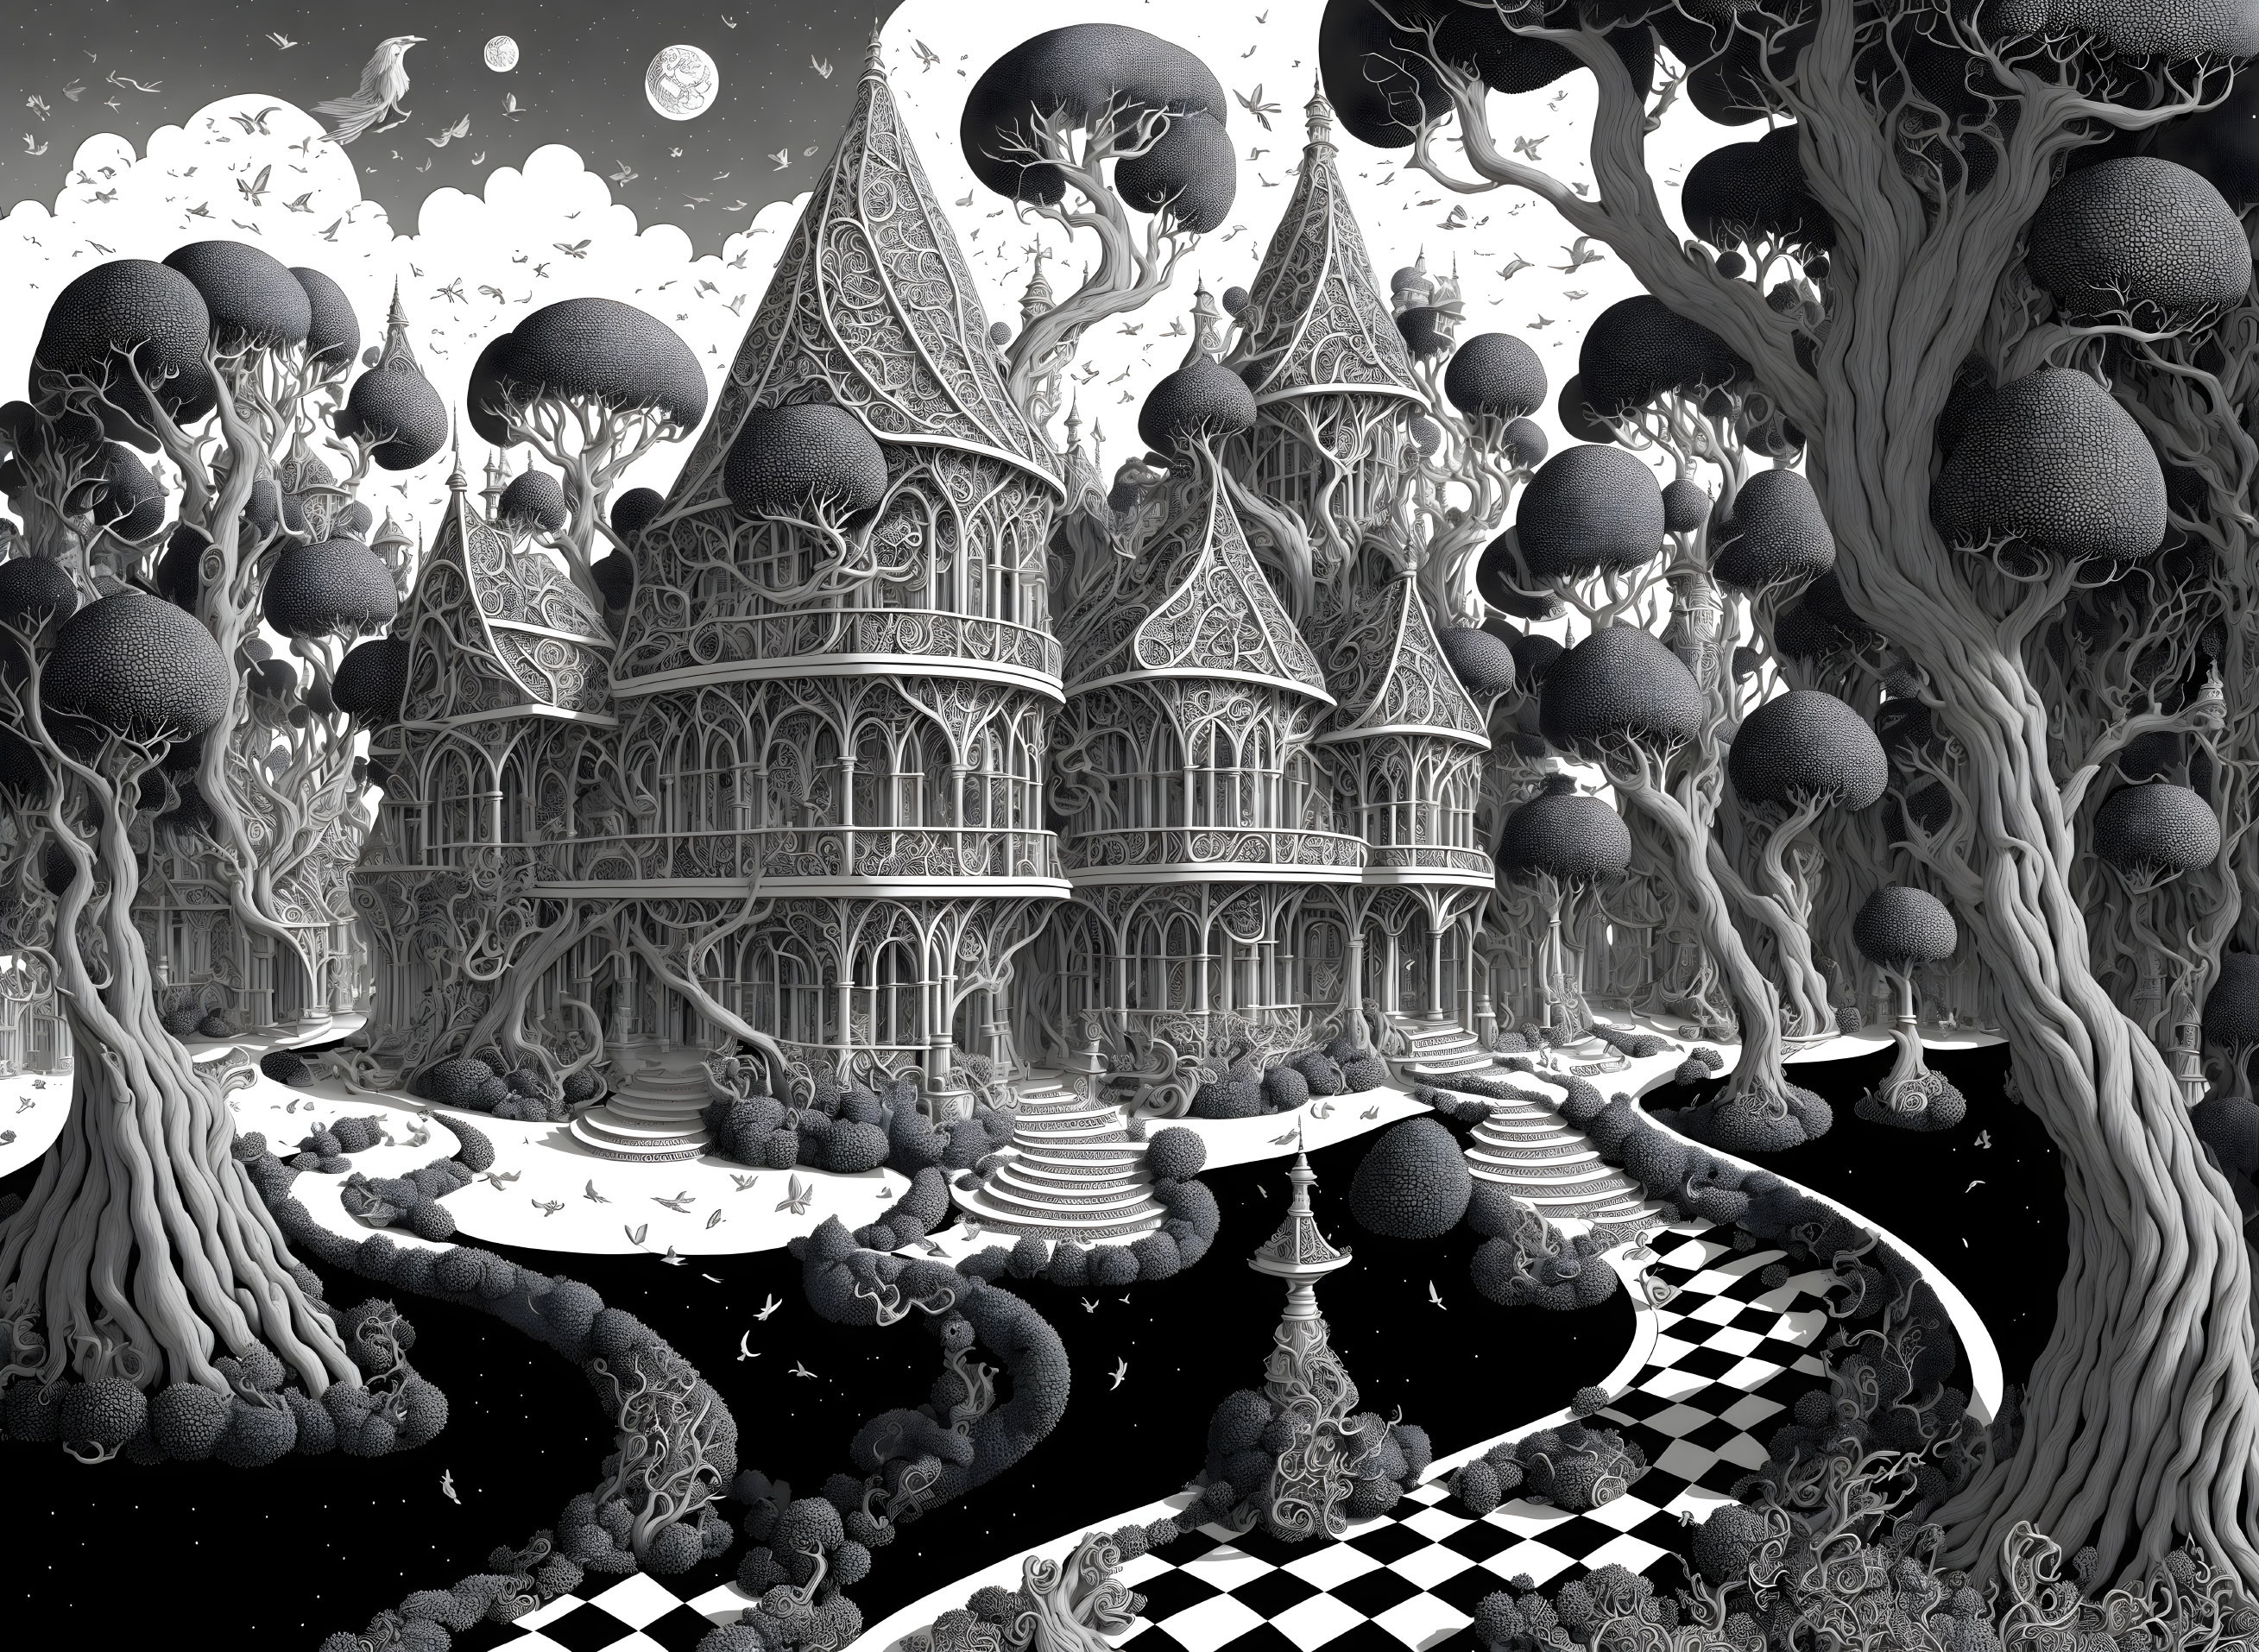 Surreal monochrome landscape with fantasy castle and whimsical trees